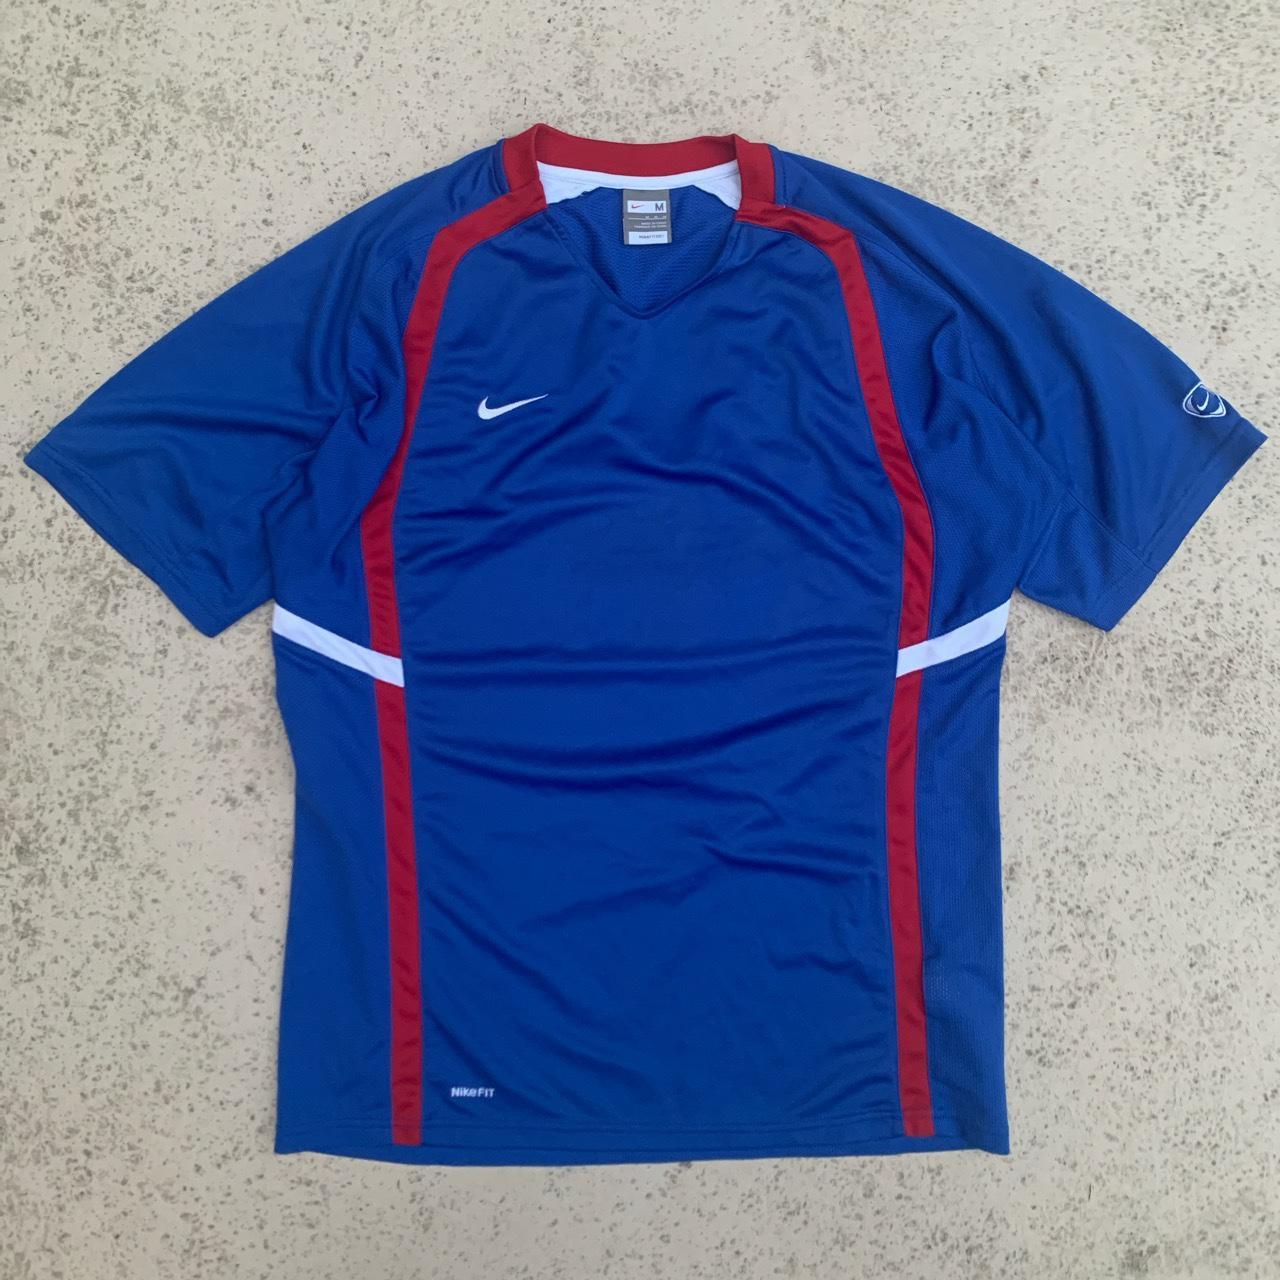 1998 vintage red white and blue nike athletic shirt - Depop